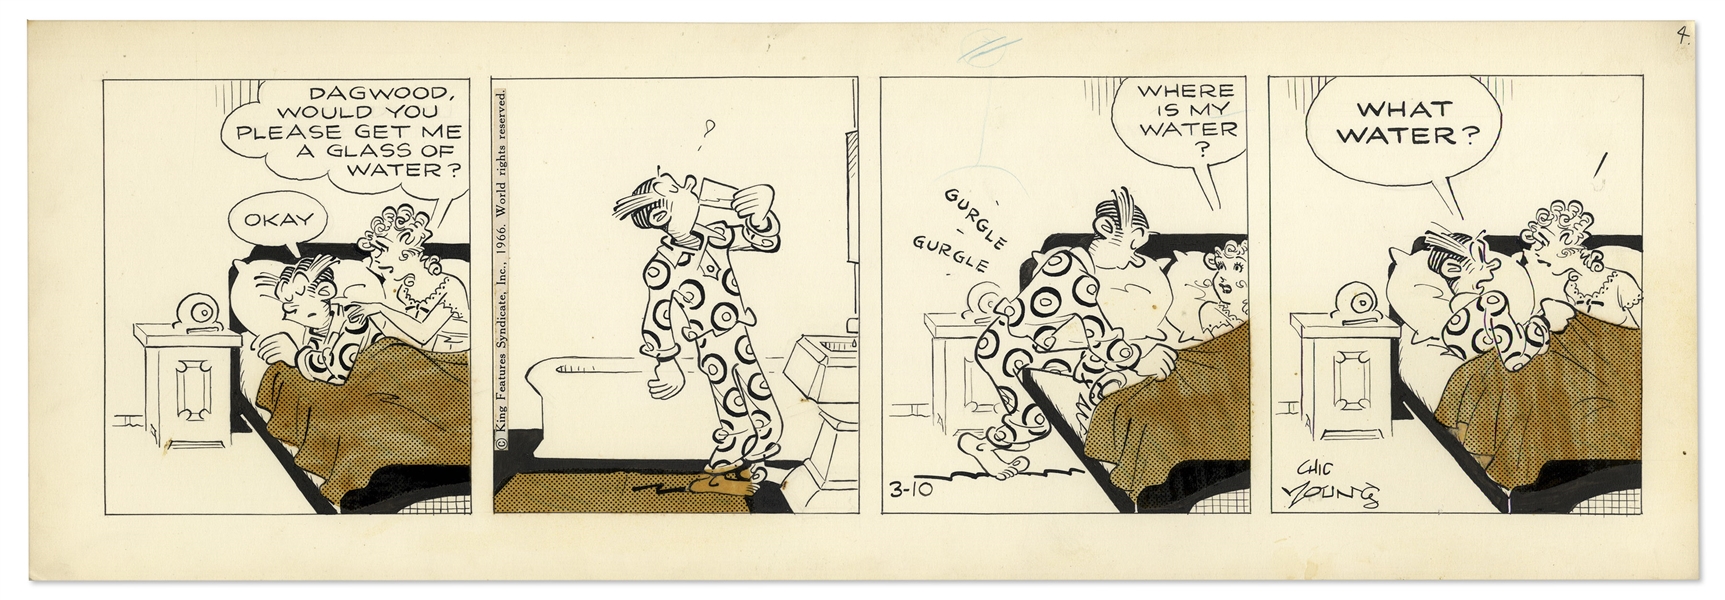 2 Chic Young Hand-Drawn ''Blondie'' Comic Strips From 1966 -- With Chic Young's Original Artwork for One